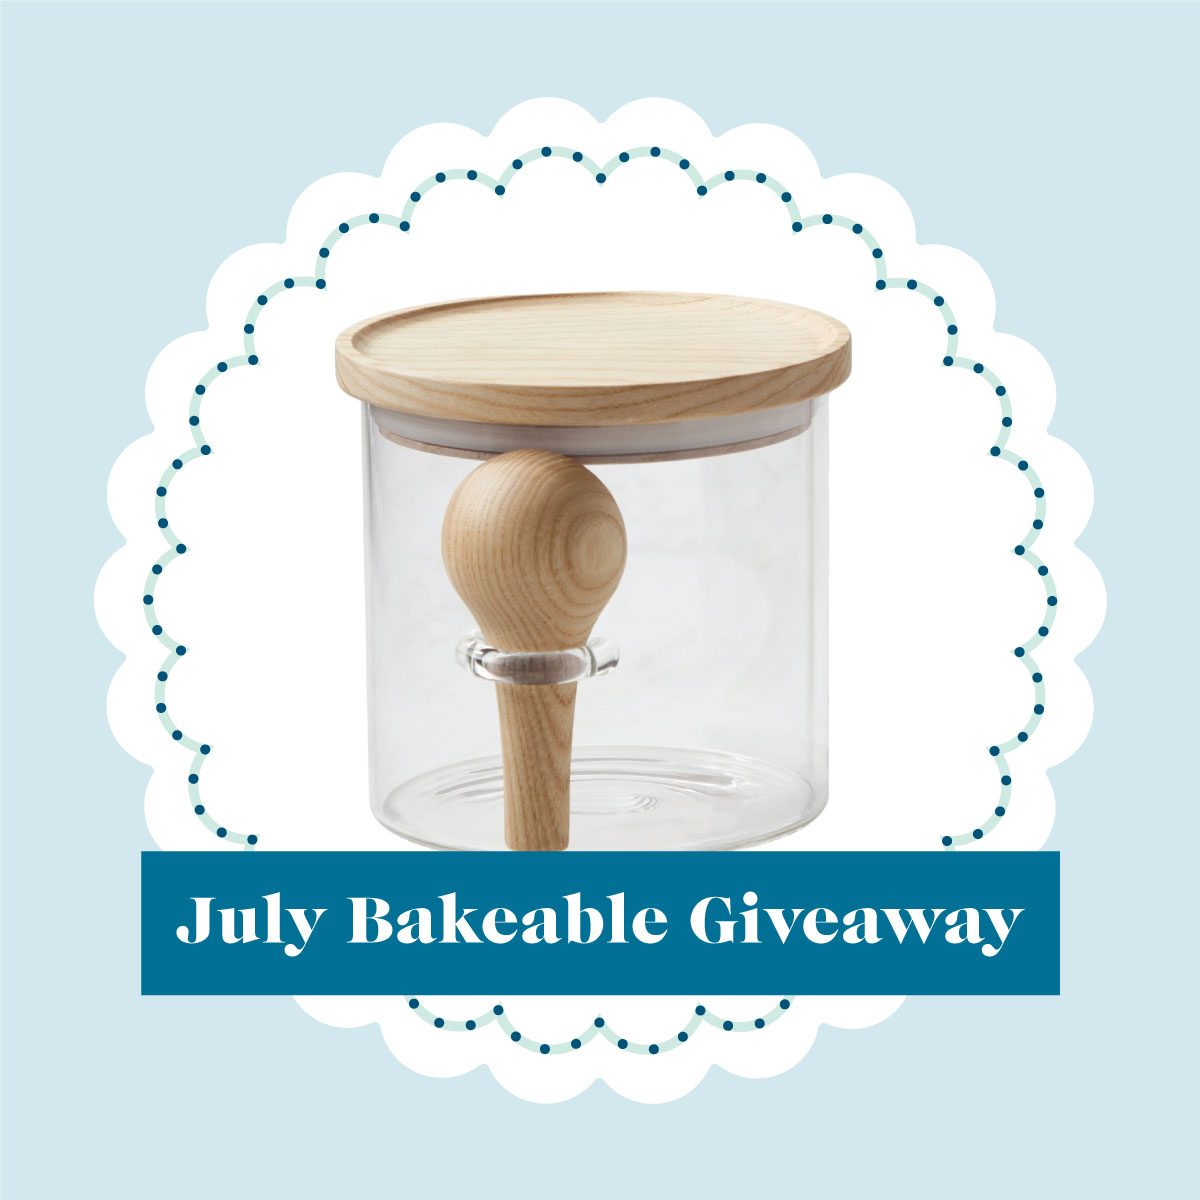 July Bakeable Giveaway